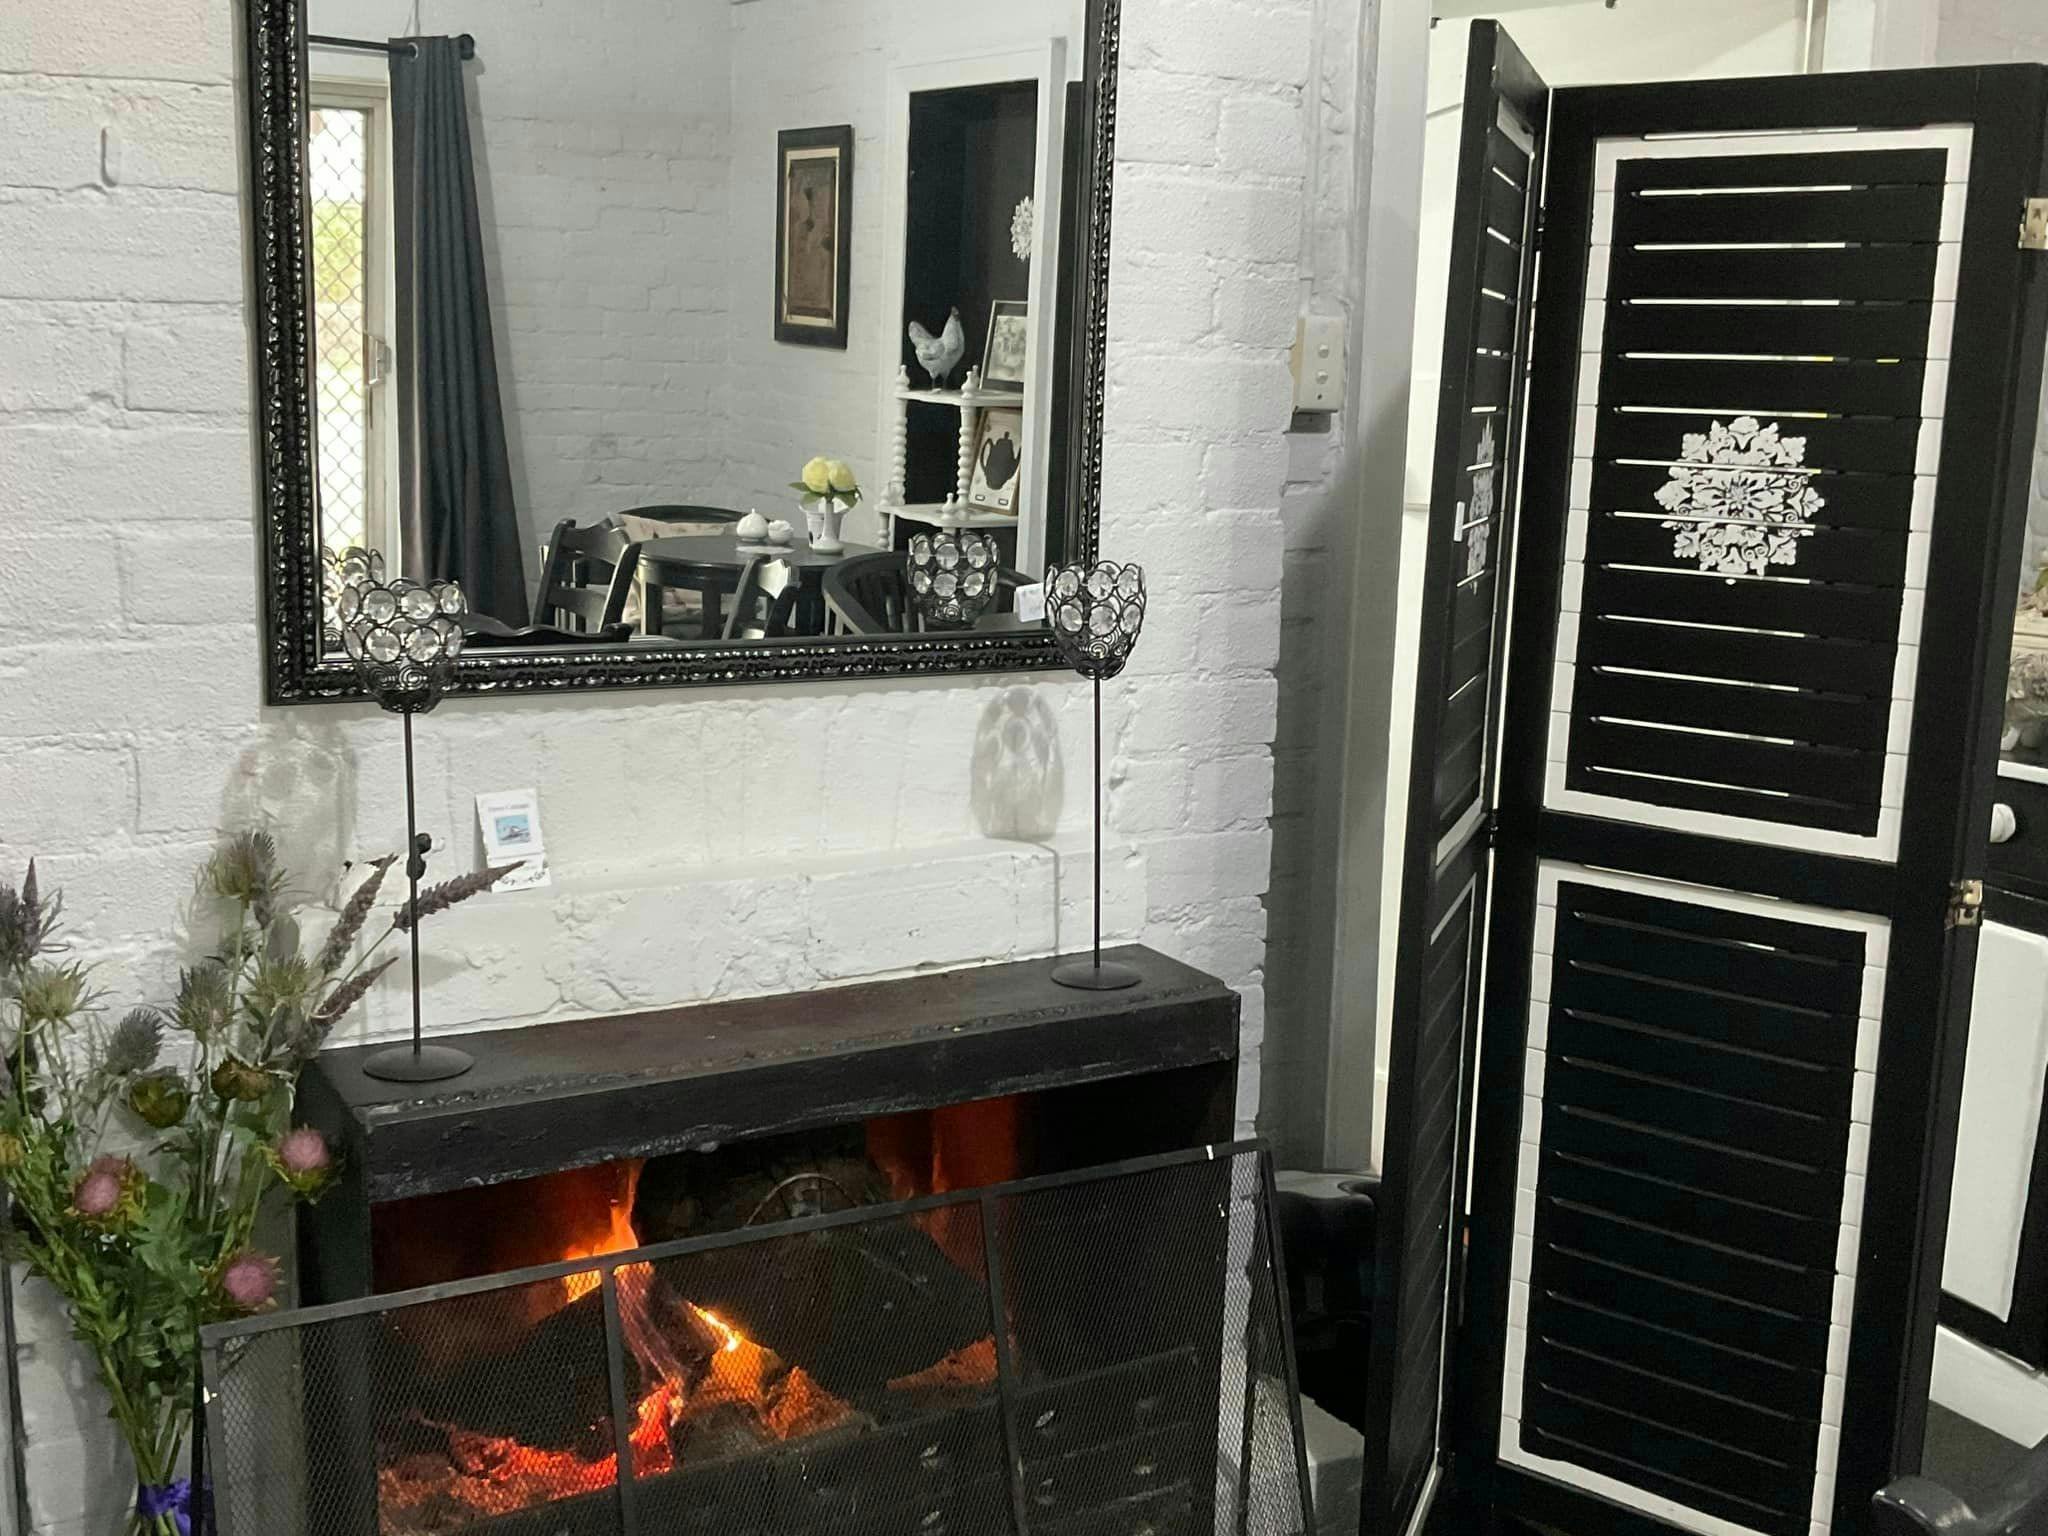 Inside of Thistle café, fire palce, mirror and black and white screen